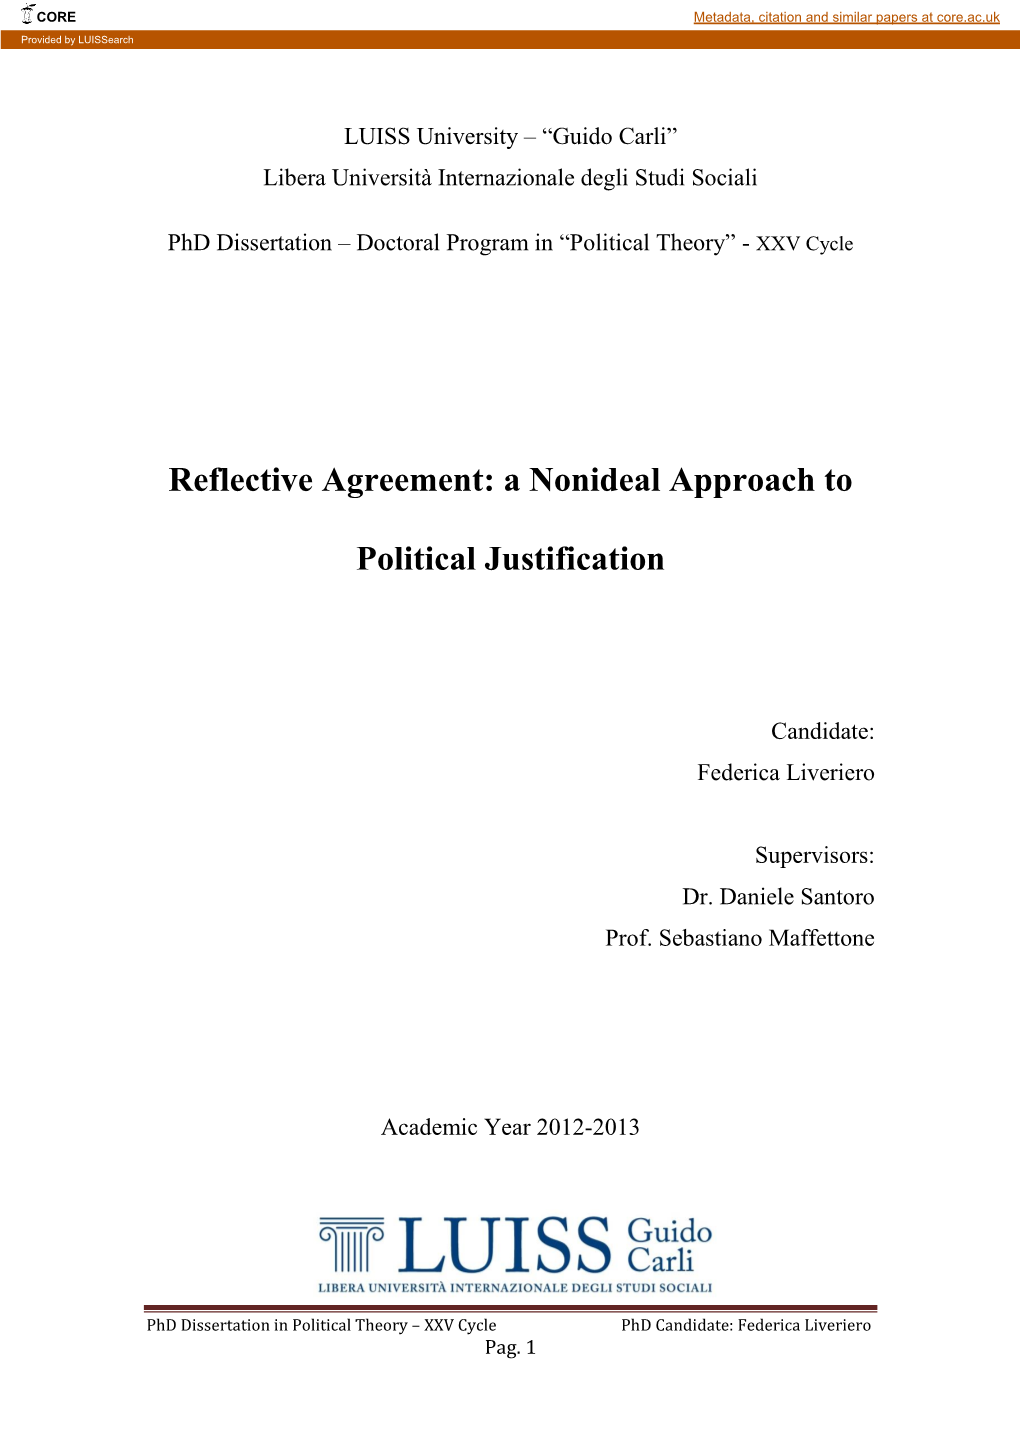 Reflective Agreement: a Nonideal Approach to Political Justification